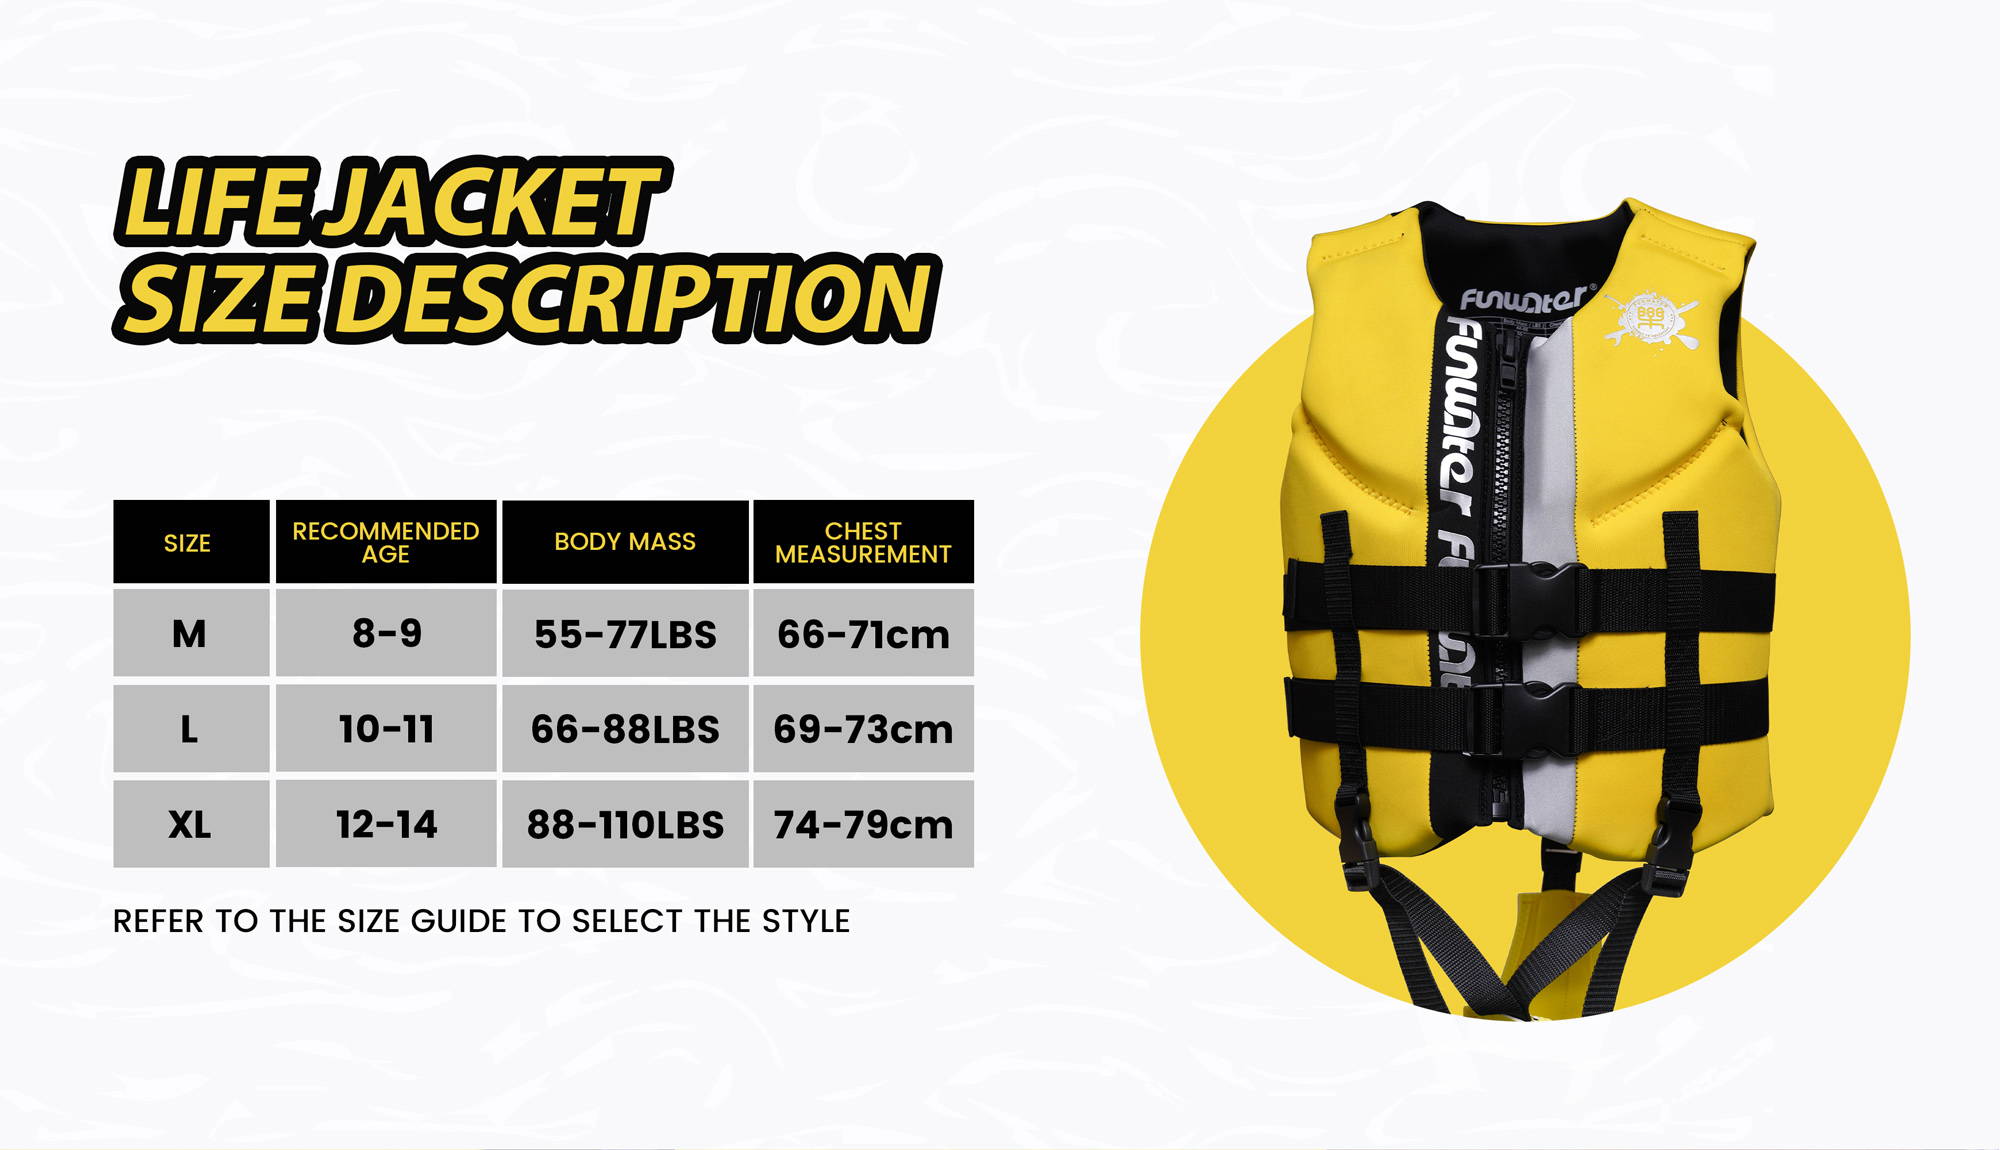 Life jacket size chart, divided into M, L, XL